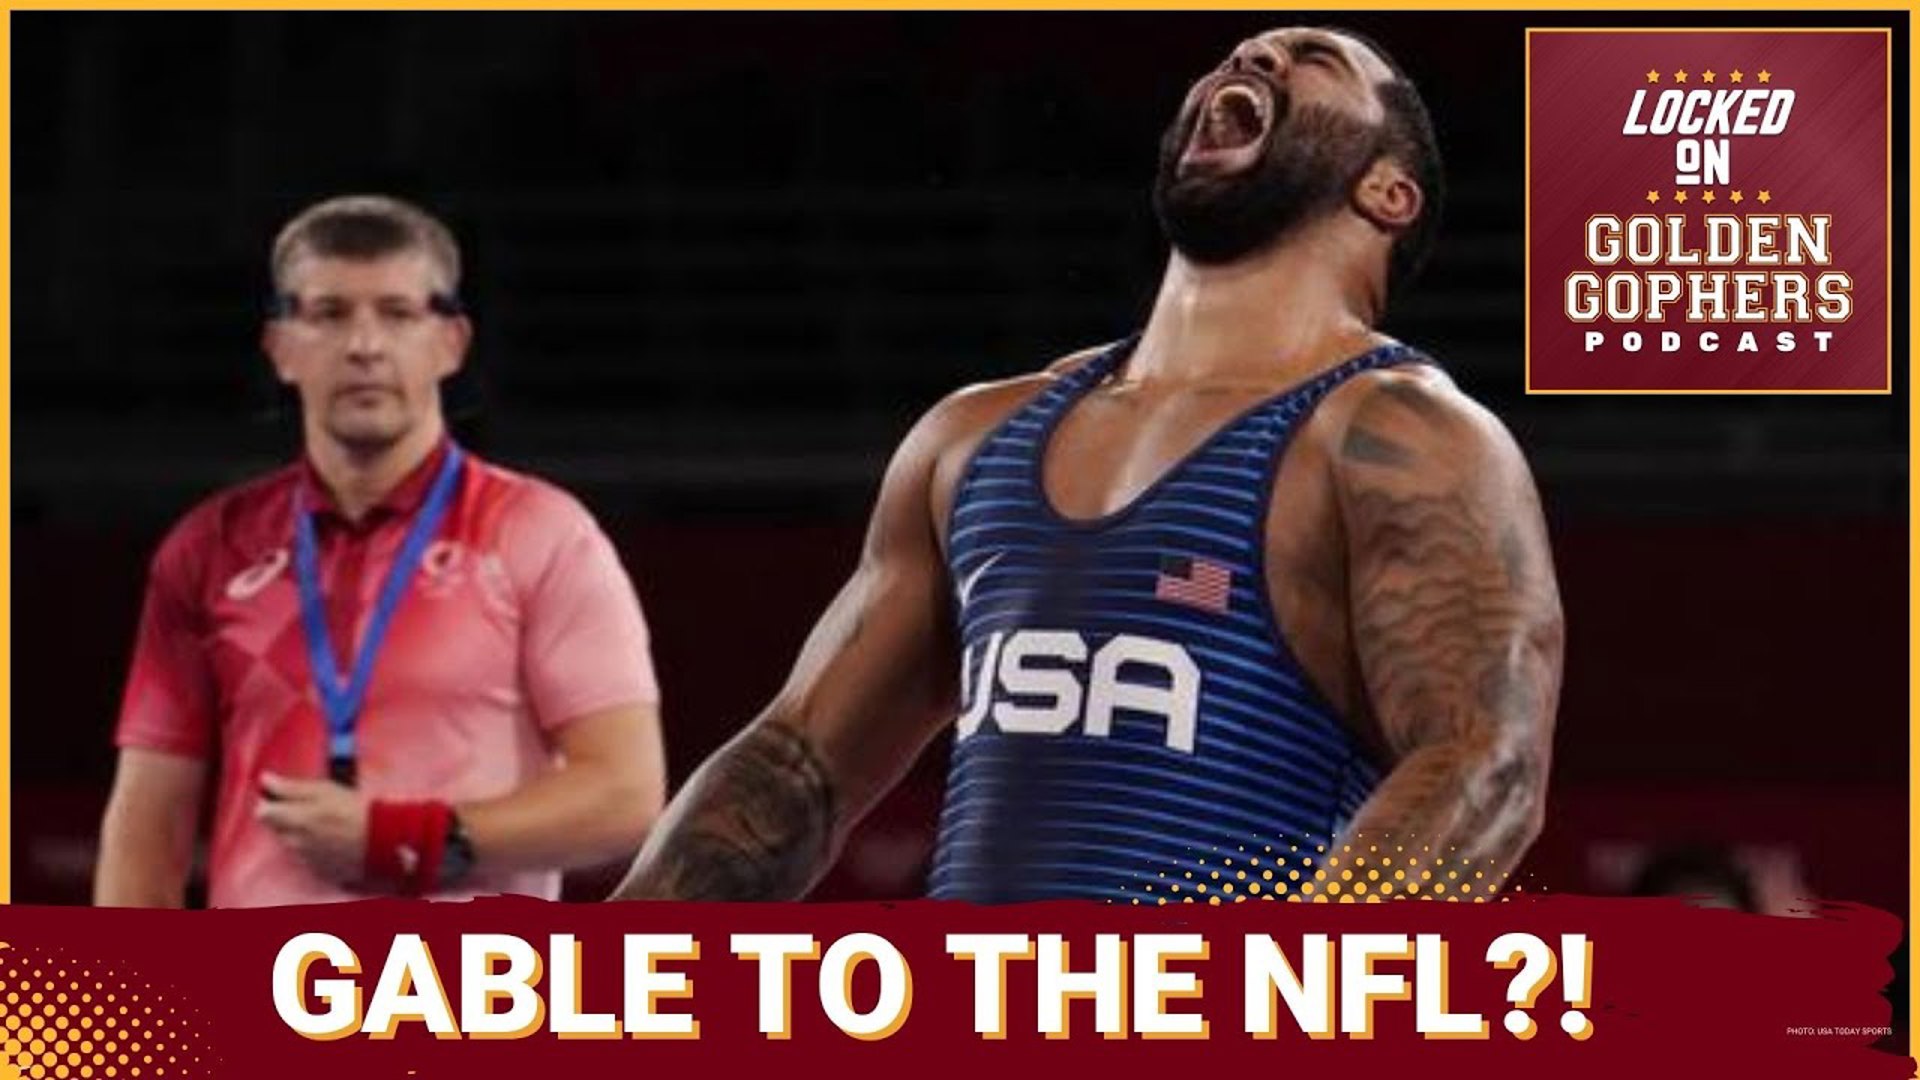 On today's Locked On Golden Gophers, host Kane Rob discusses how the Minnesota Gophers wrestling legend is getting interest for the NFL!?